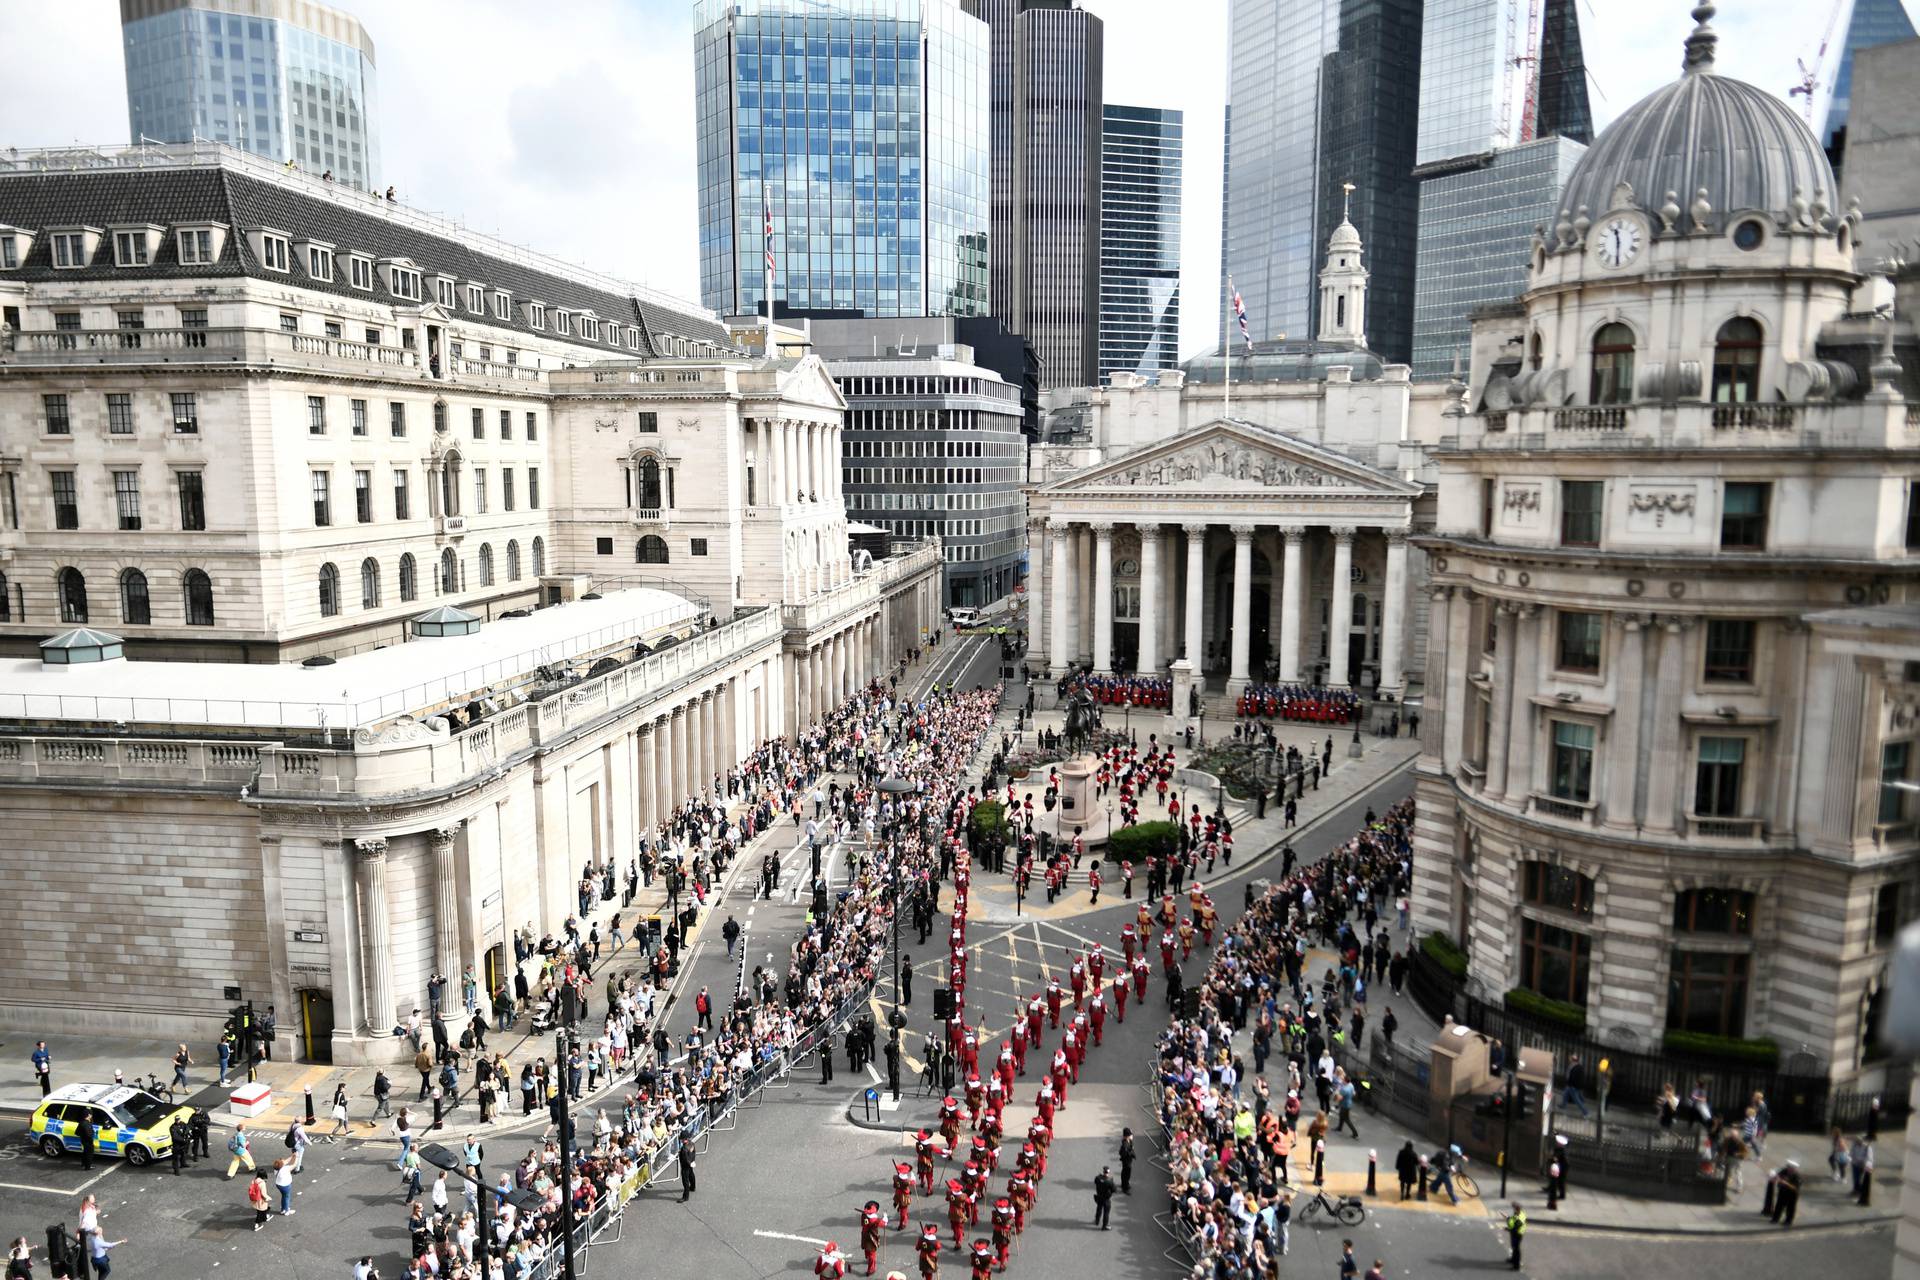 Members of the public and members of the military in ceremonial uniform attend the second Proclamation of Britain's new King, King Charles III, at the Royal Exchange, in the City of London, on September 10, 2022. - King Charles III pledged to follow his m